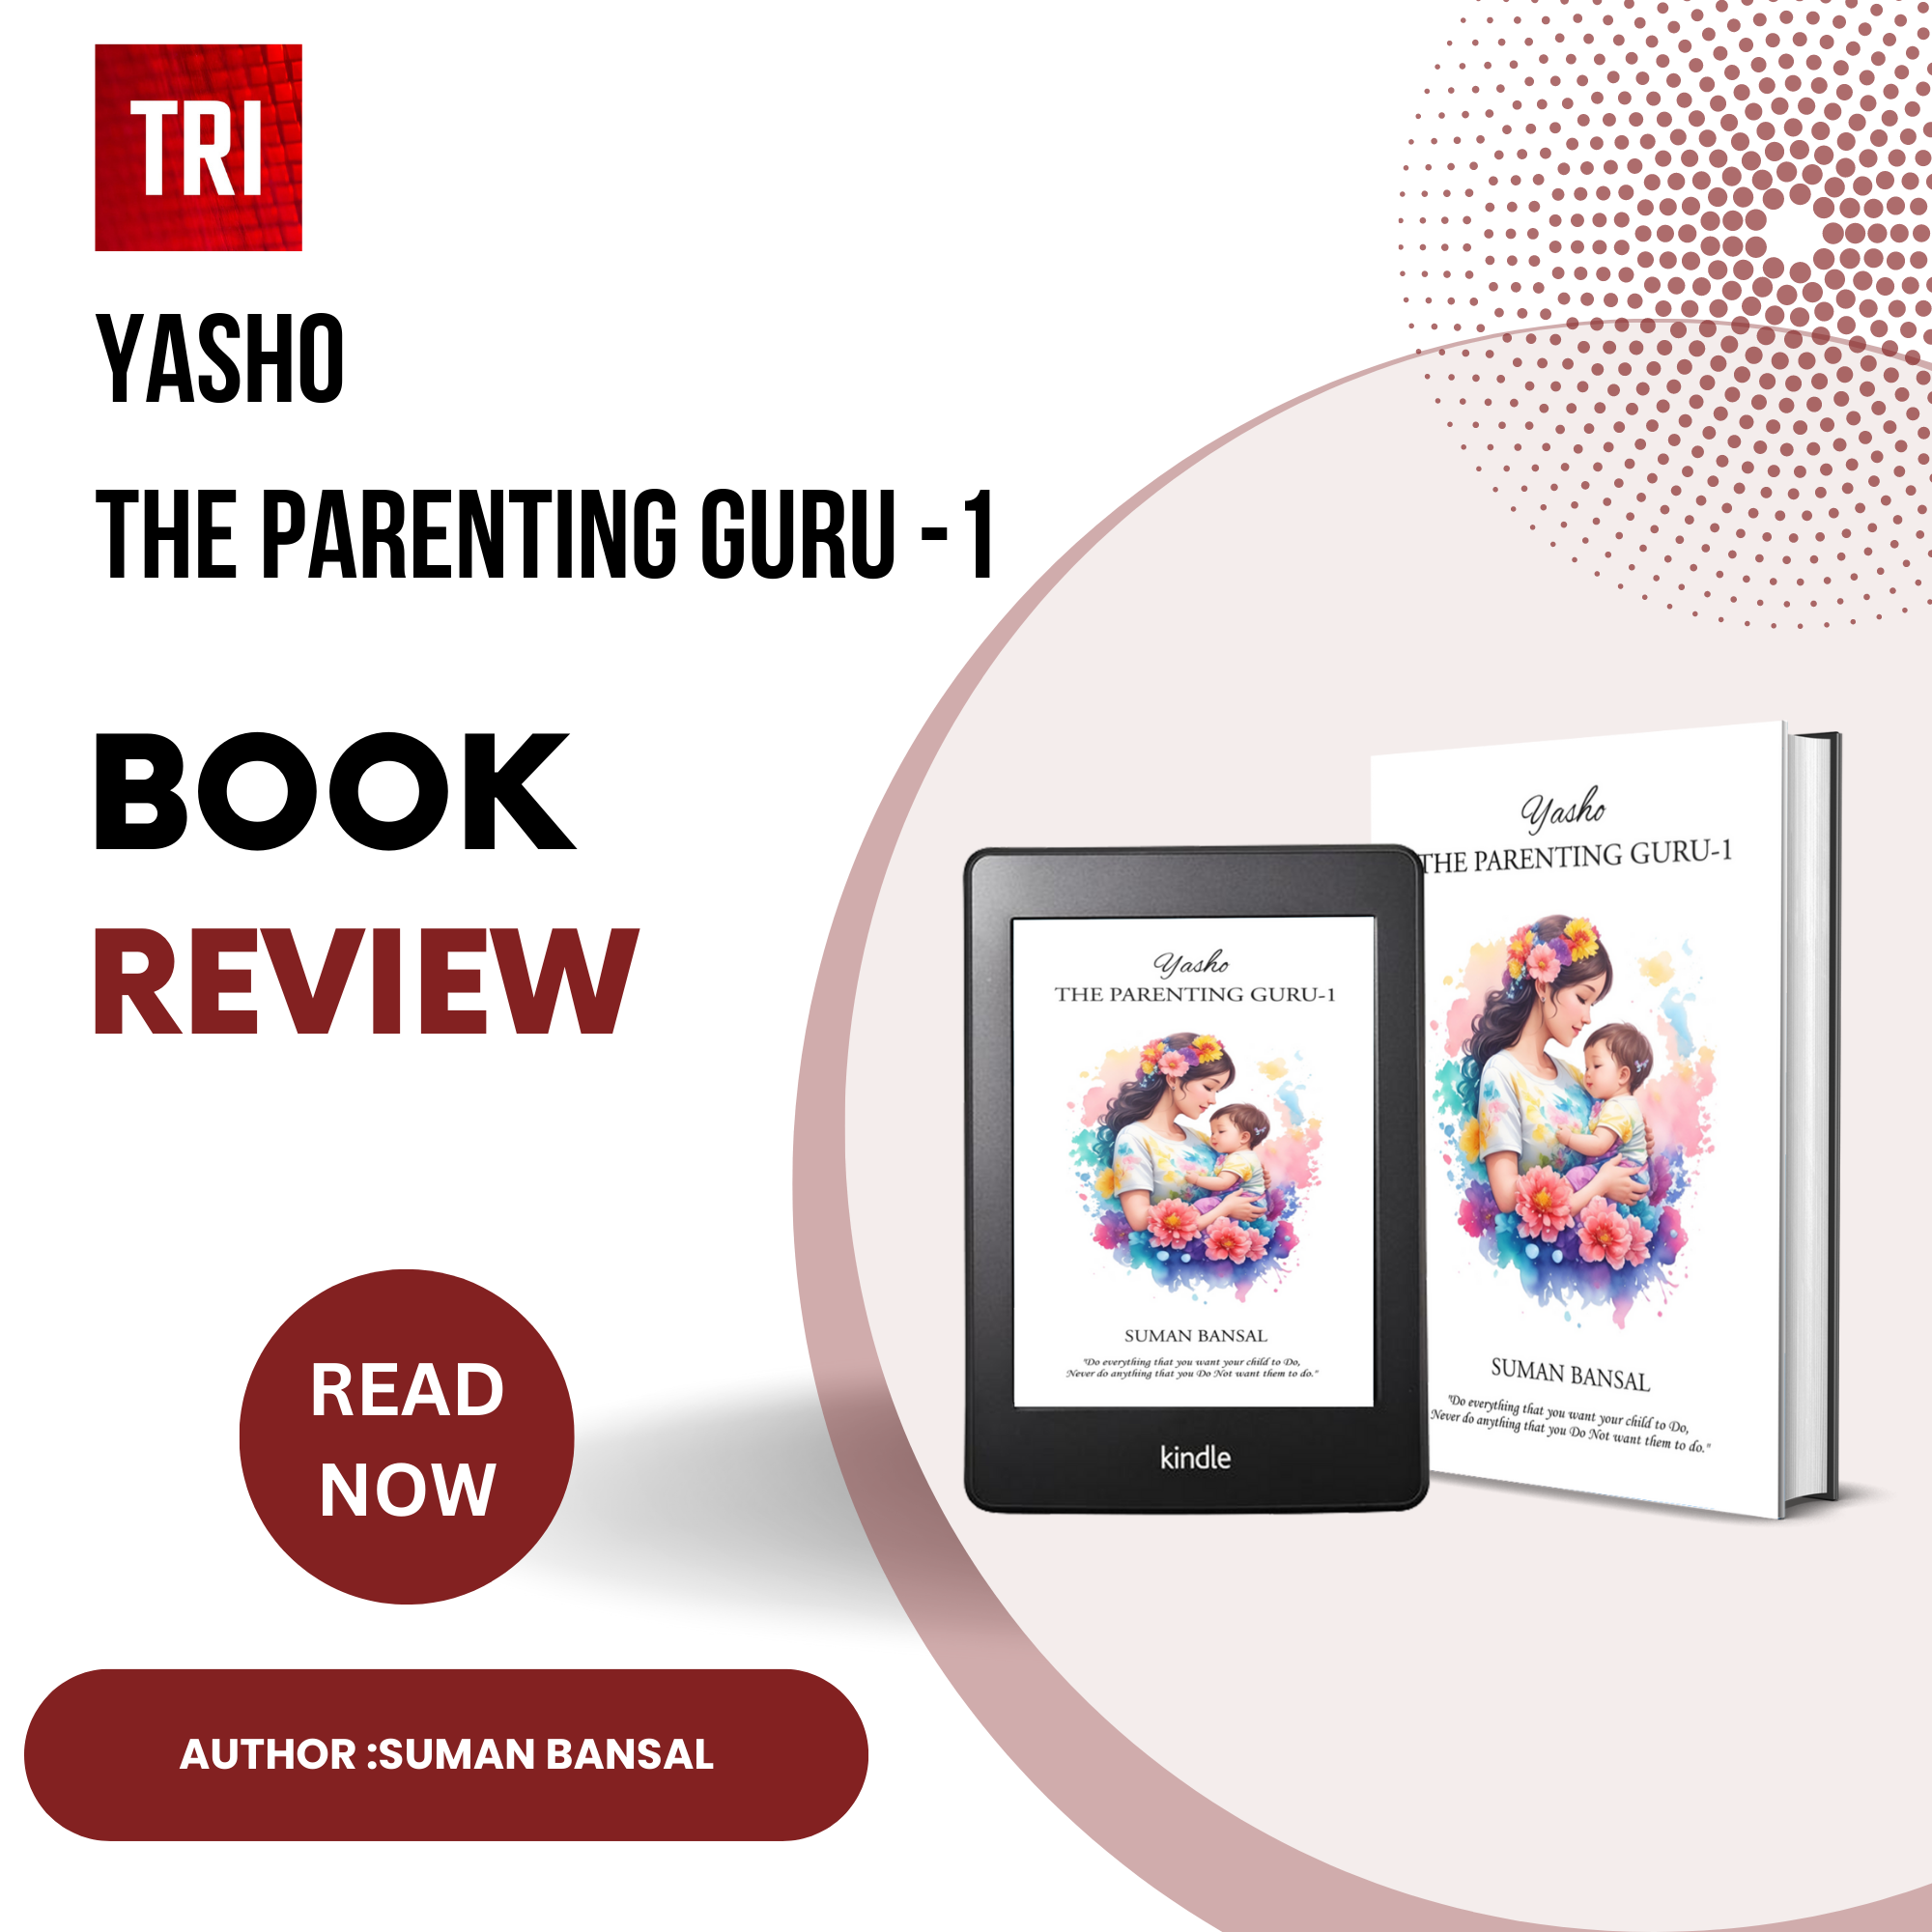 Book review “Yasho – The Parenting Guru – 1” authored by Suman Bansal